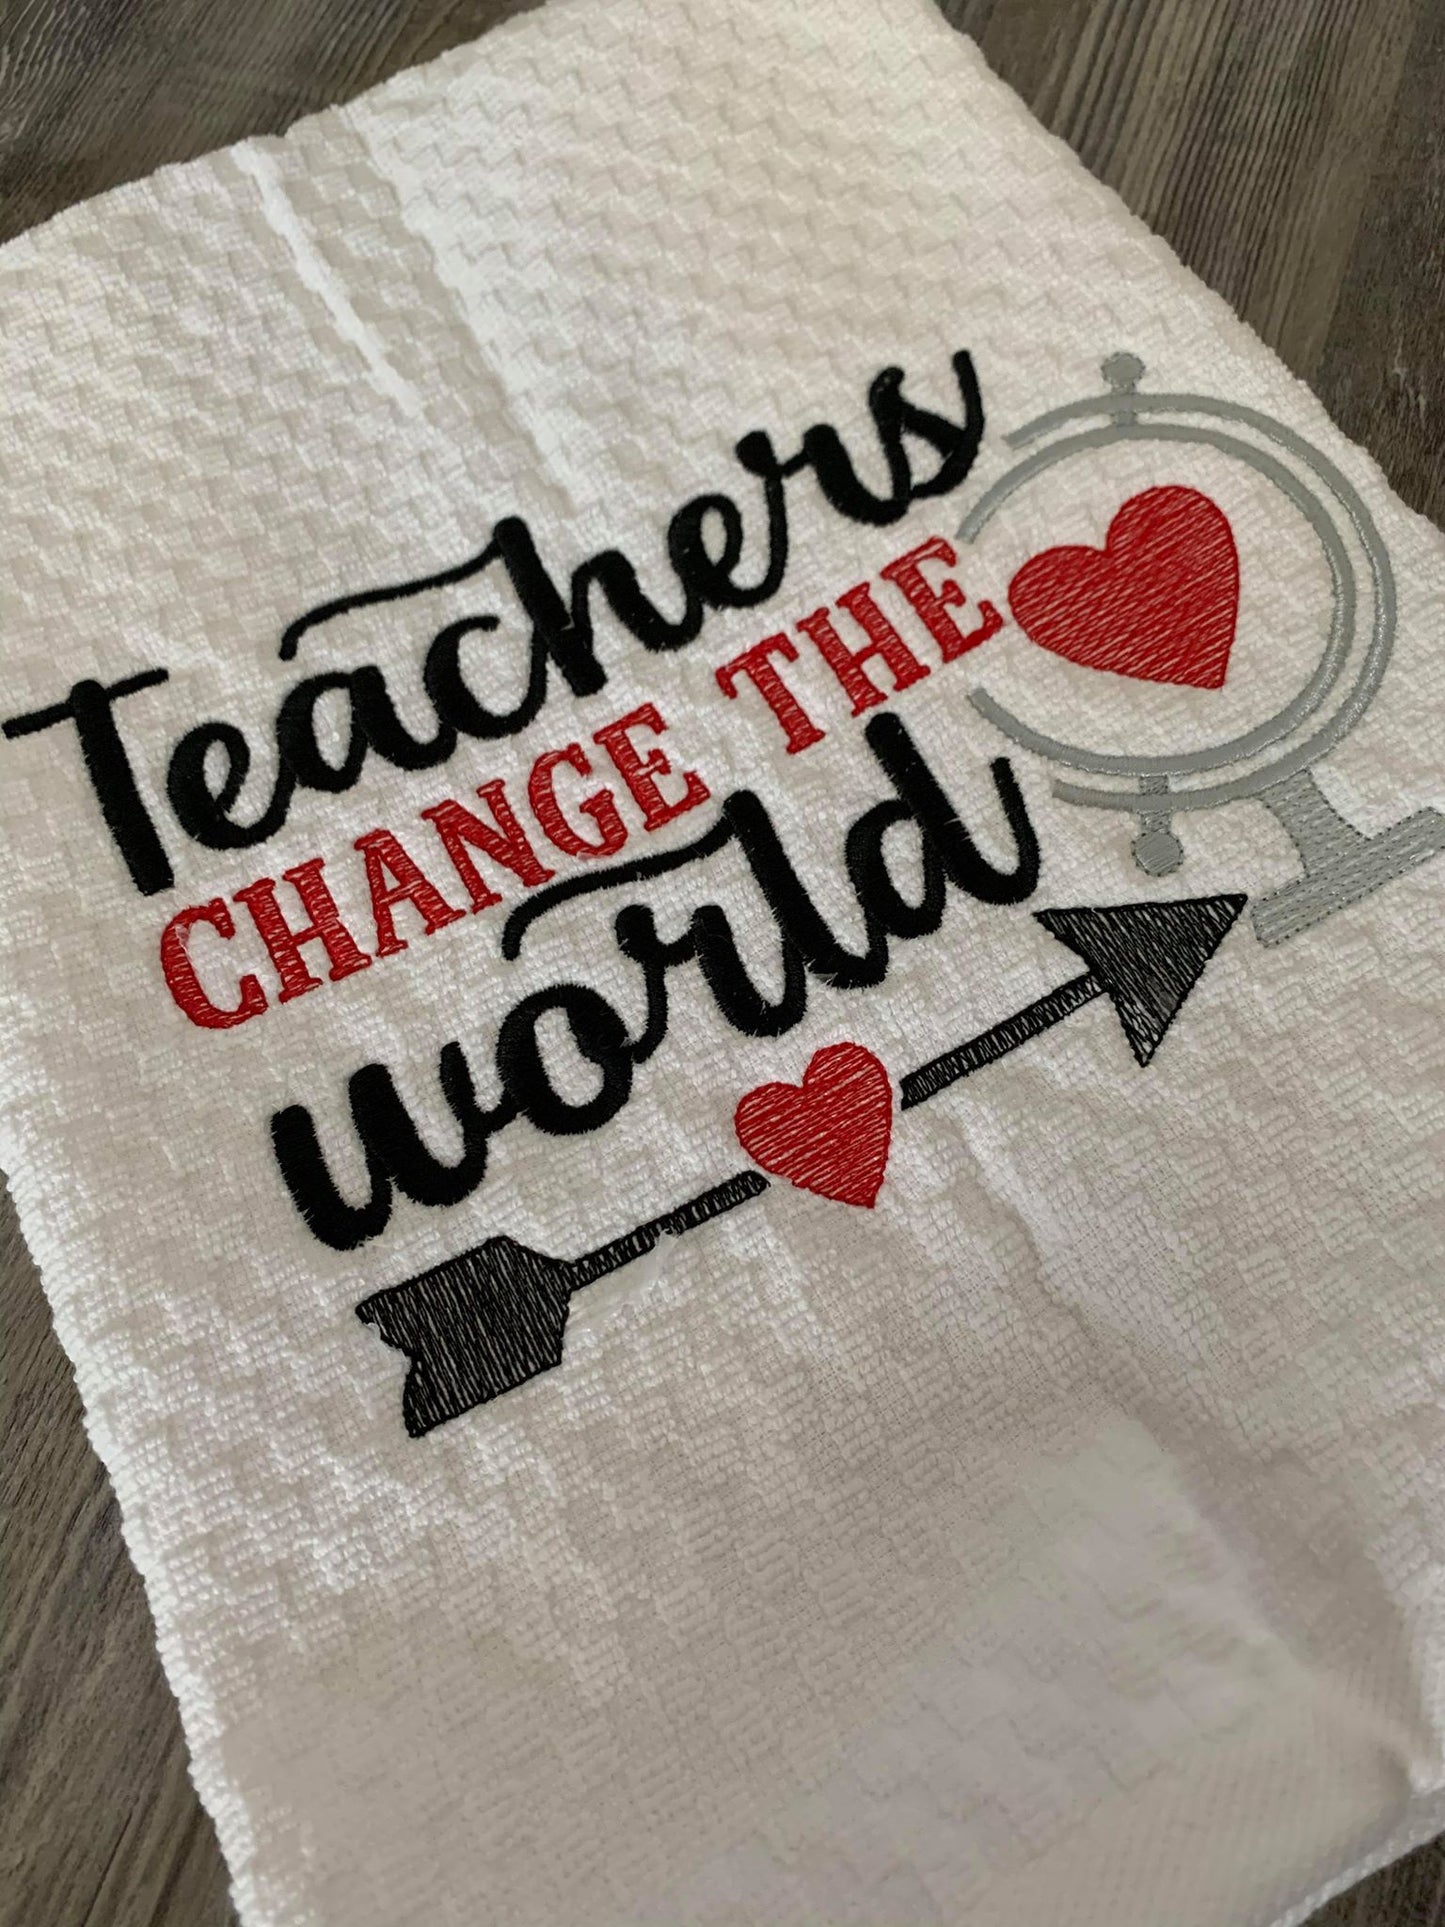 Teachers can change the world - 2 Sizes - Digital Embroidery Design